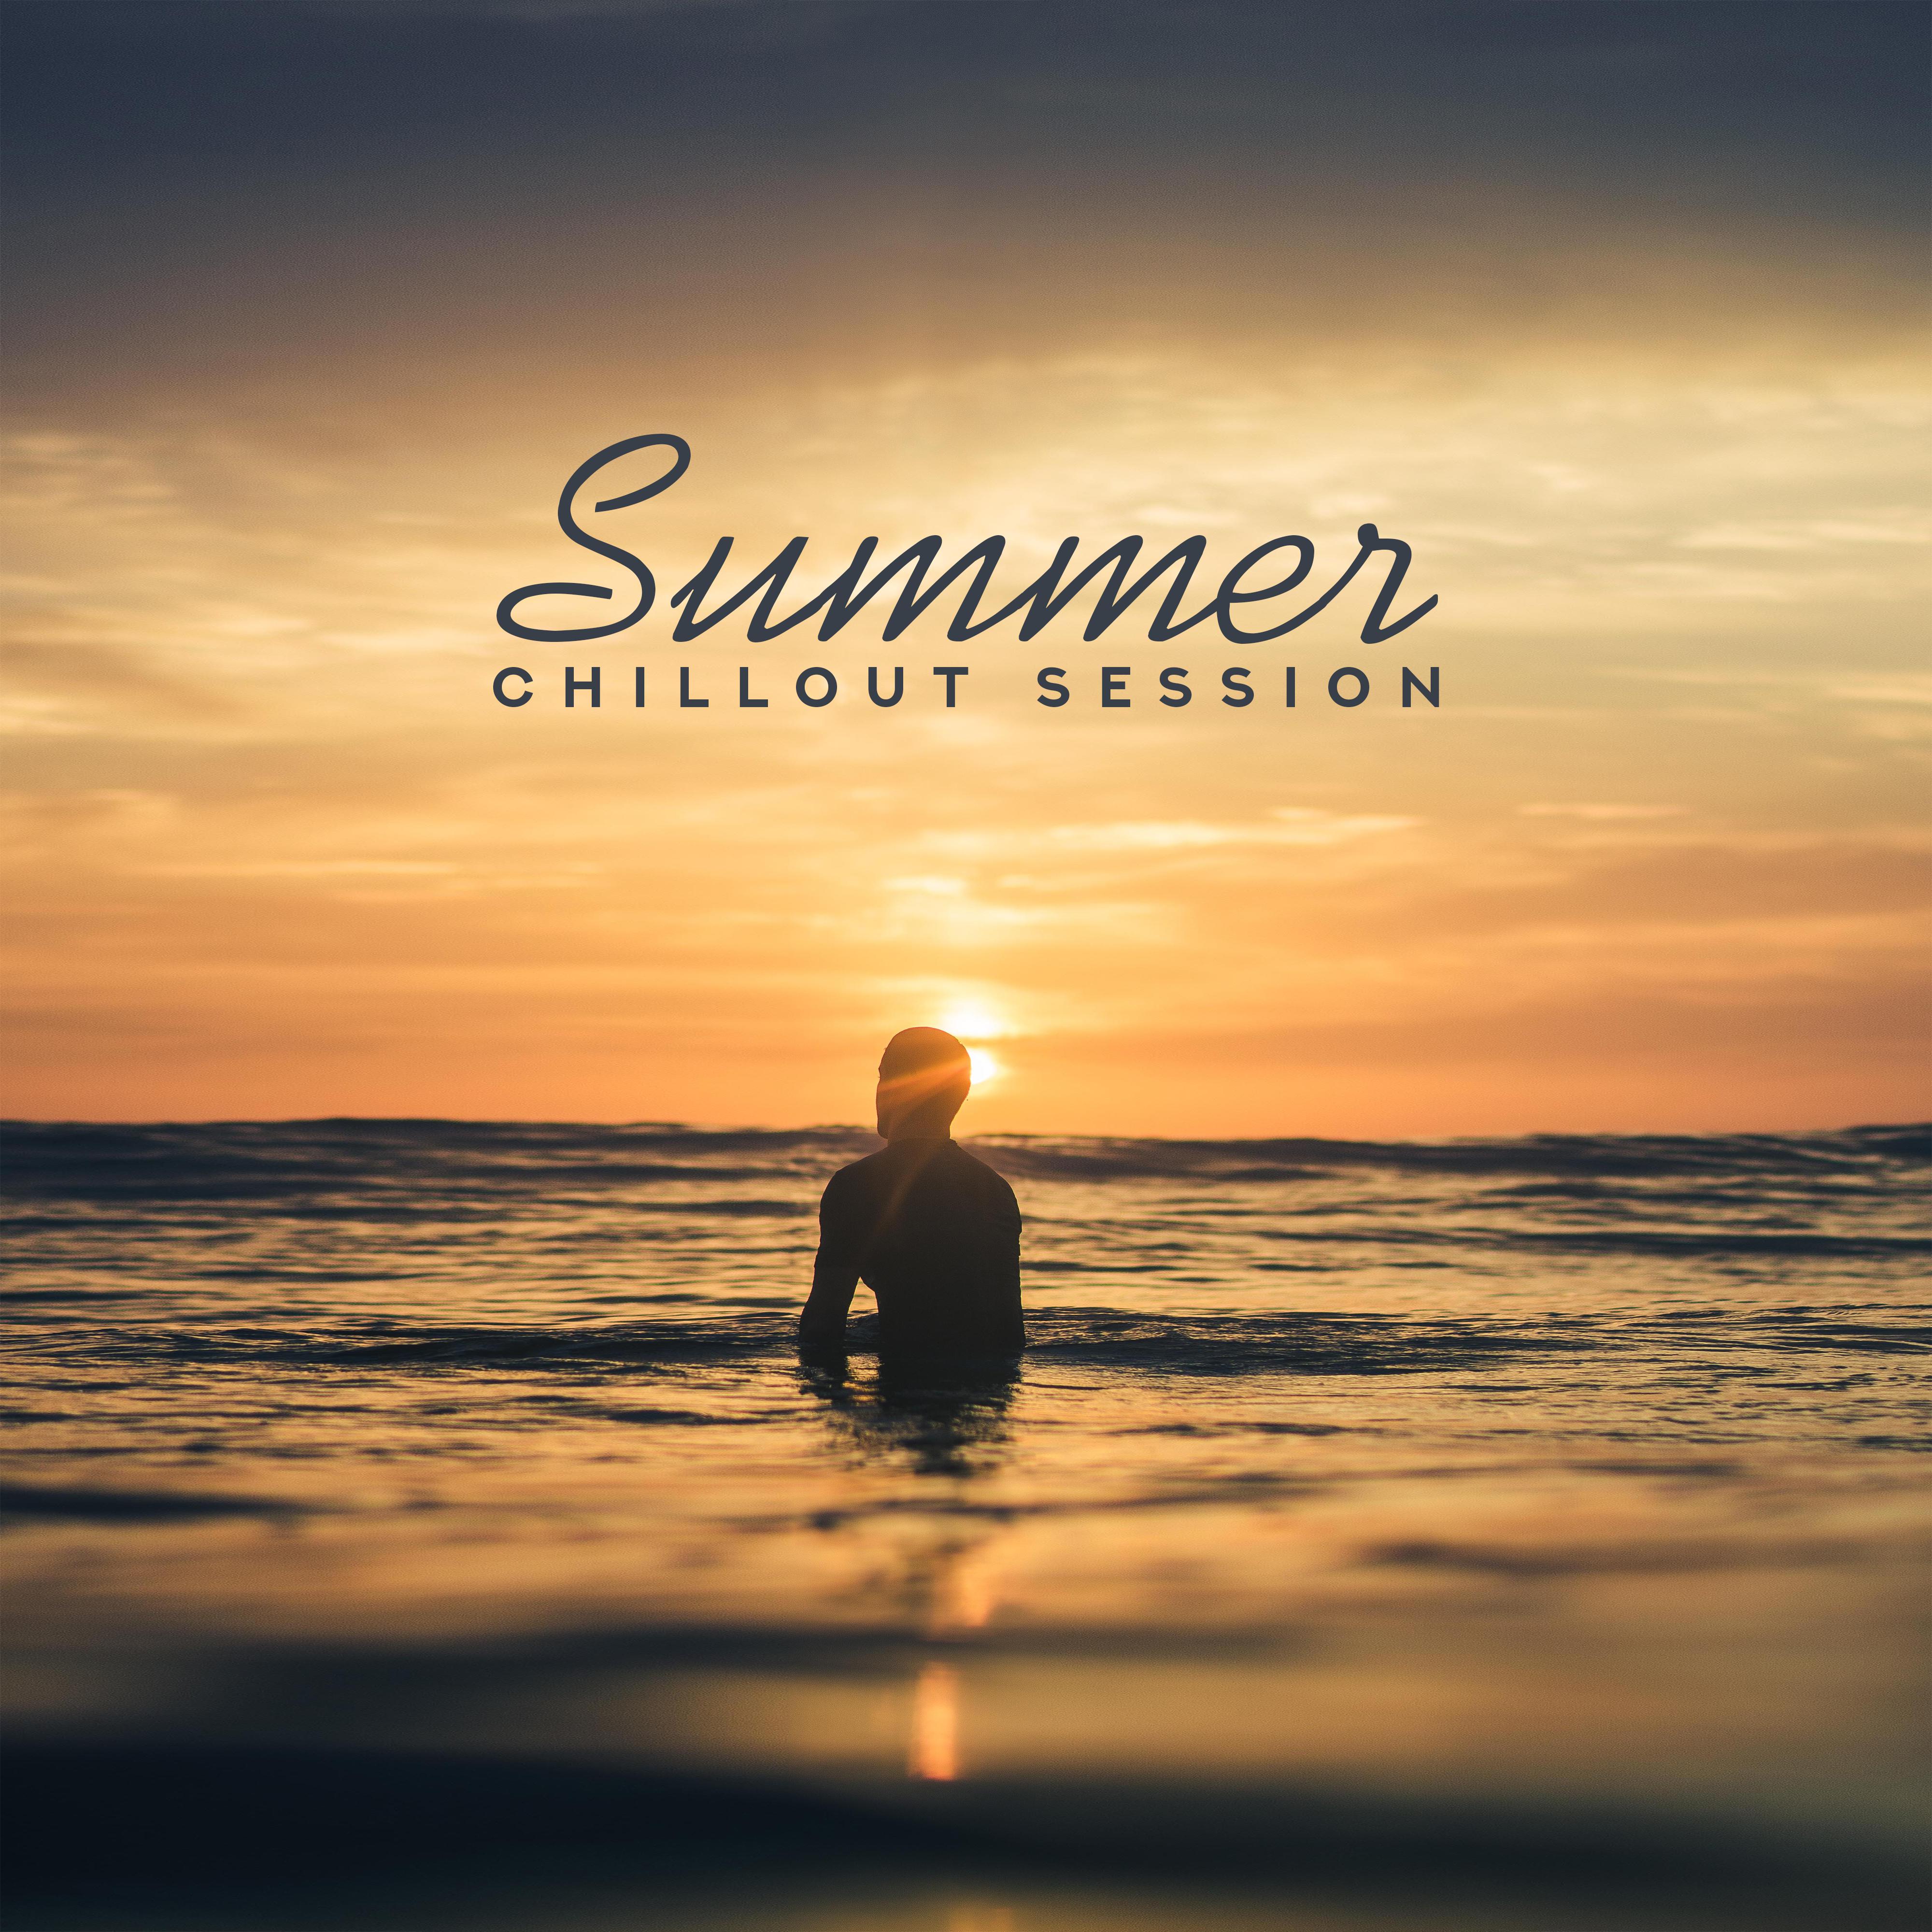 Summer Chillout Session: 15 of the Hottest Chillout Songs for Summer 2019